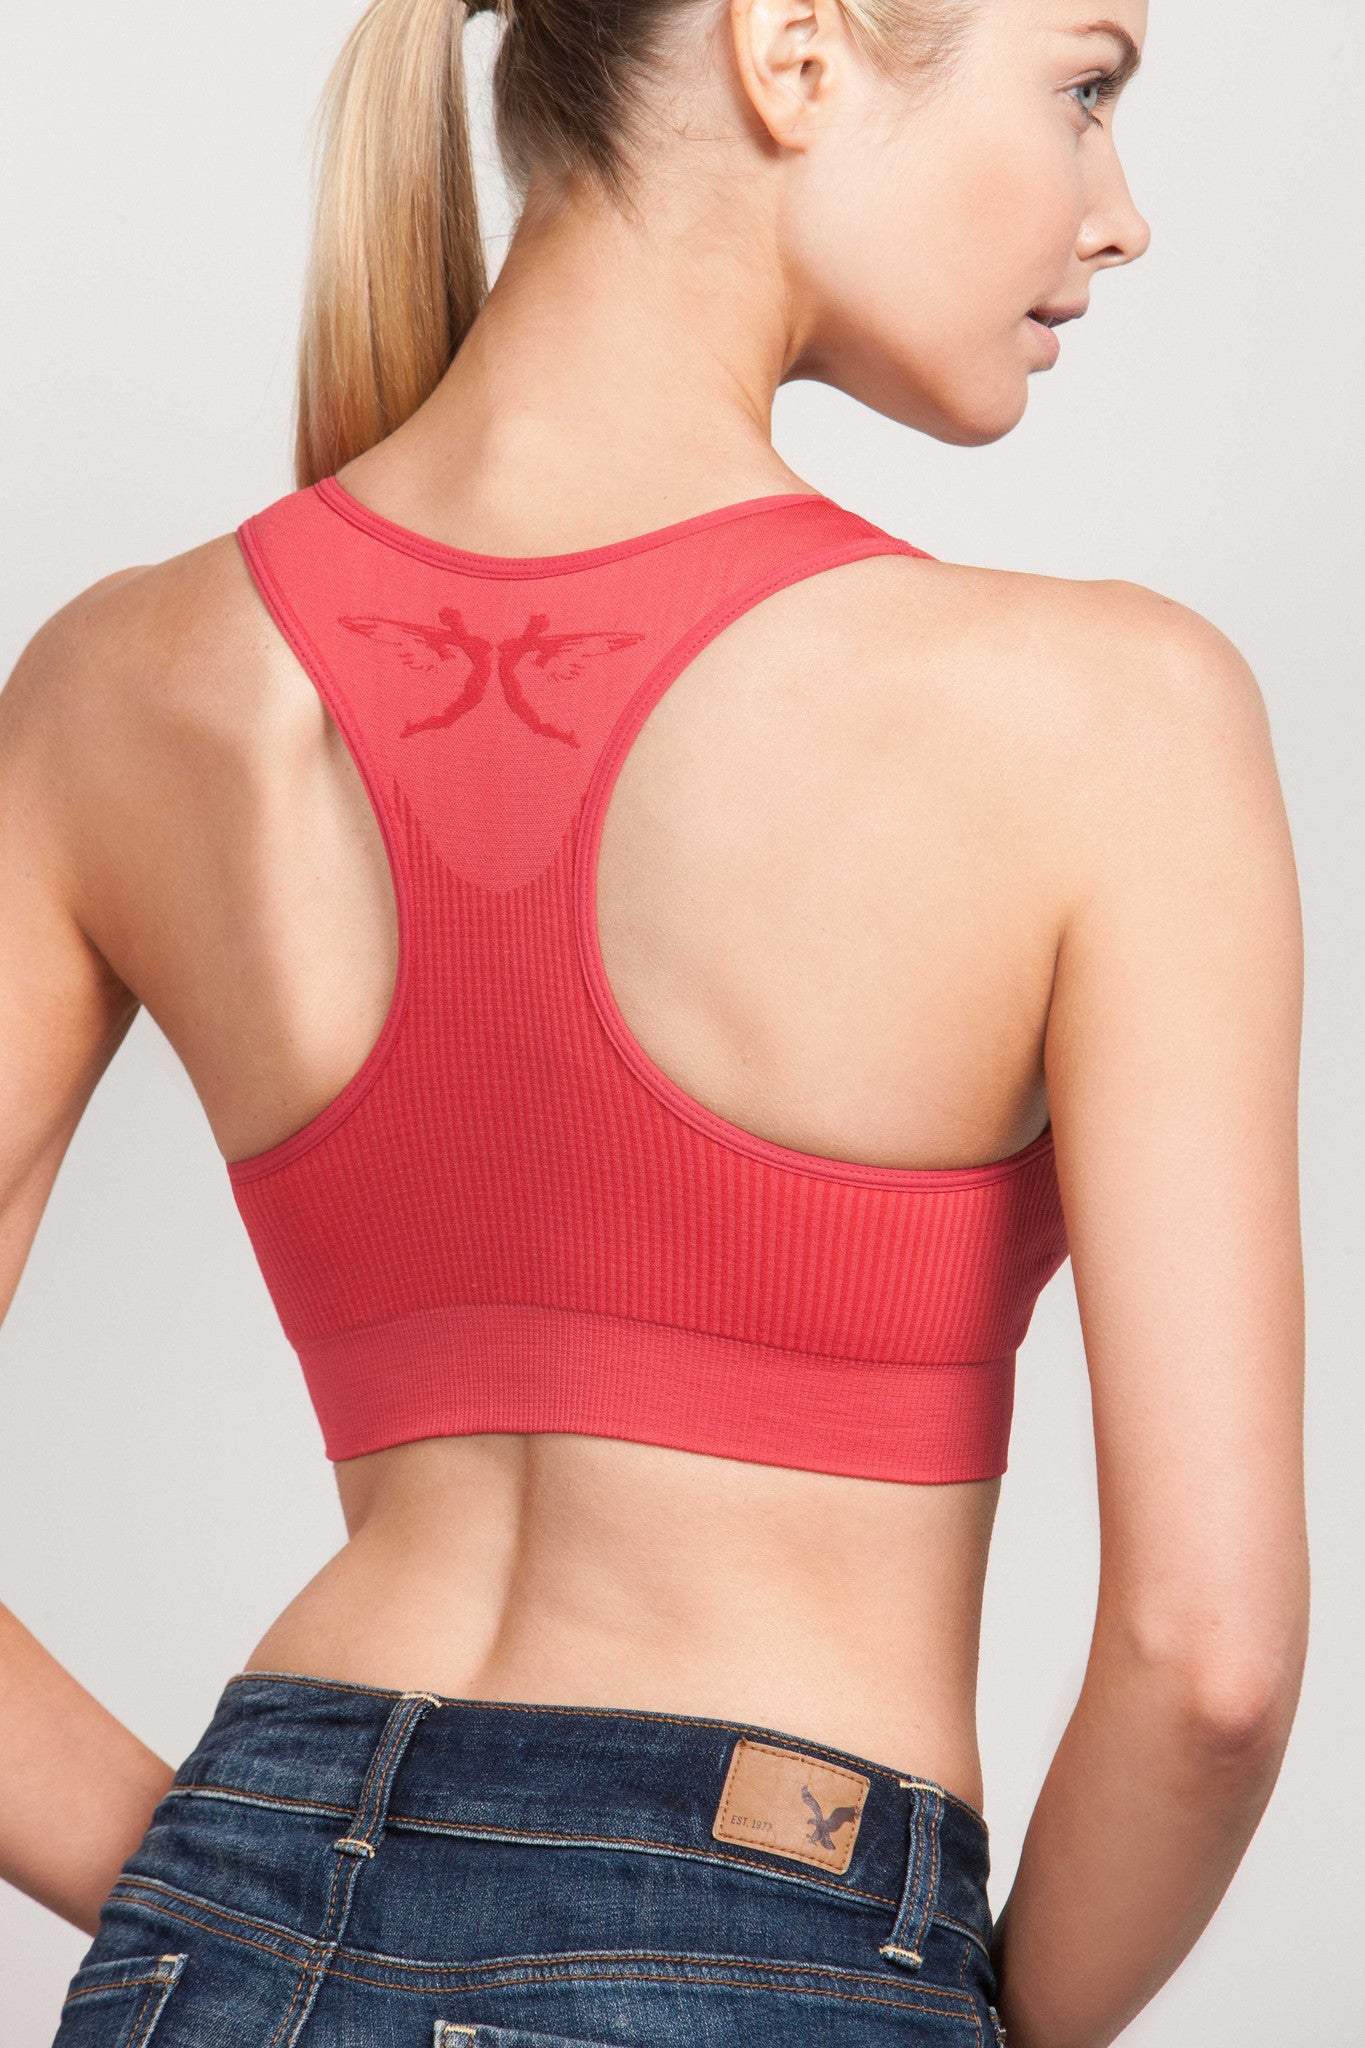 Breast Whisperer Bra for Augmented Women in Coral Back Closeup